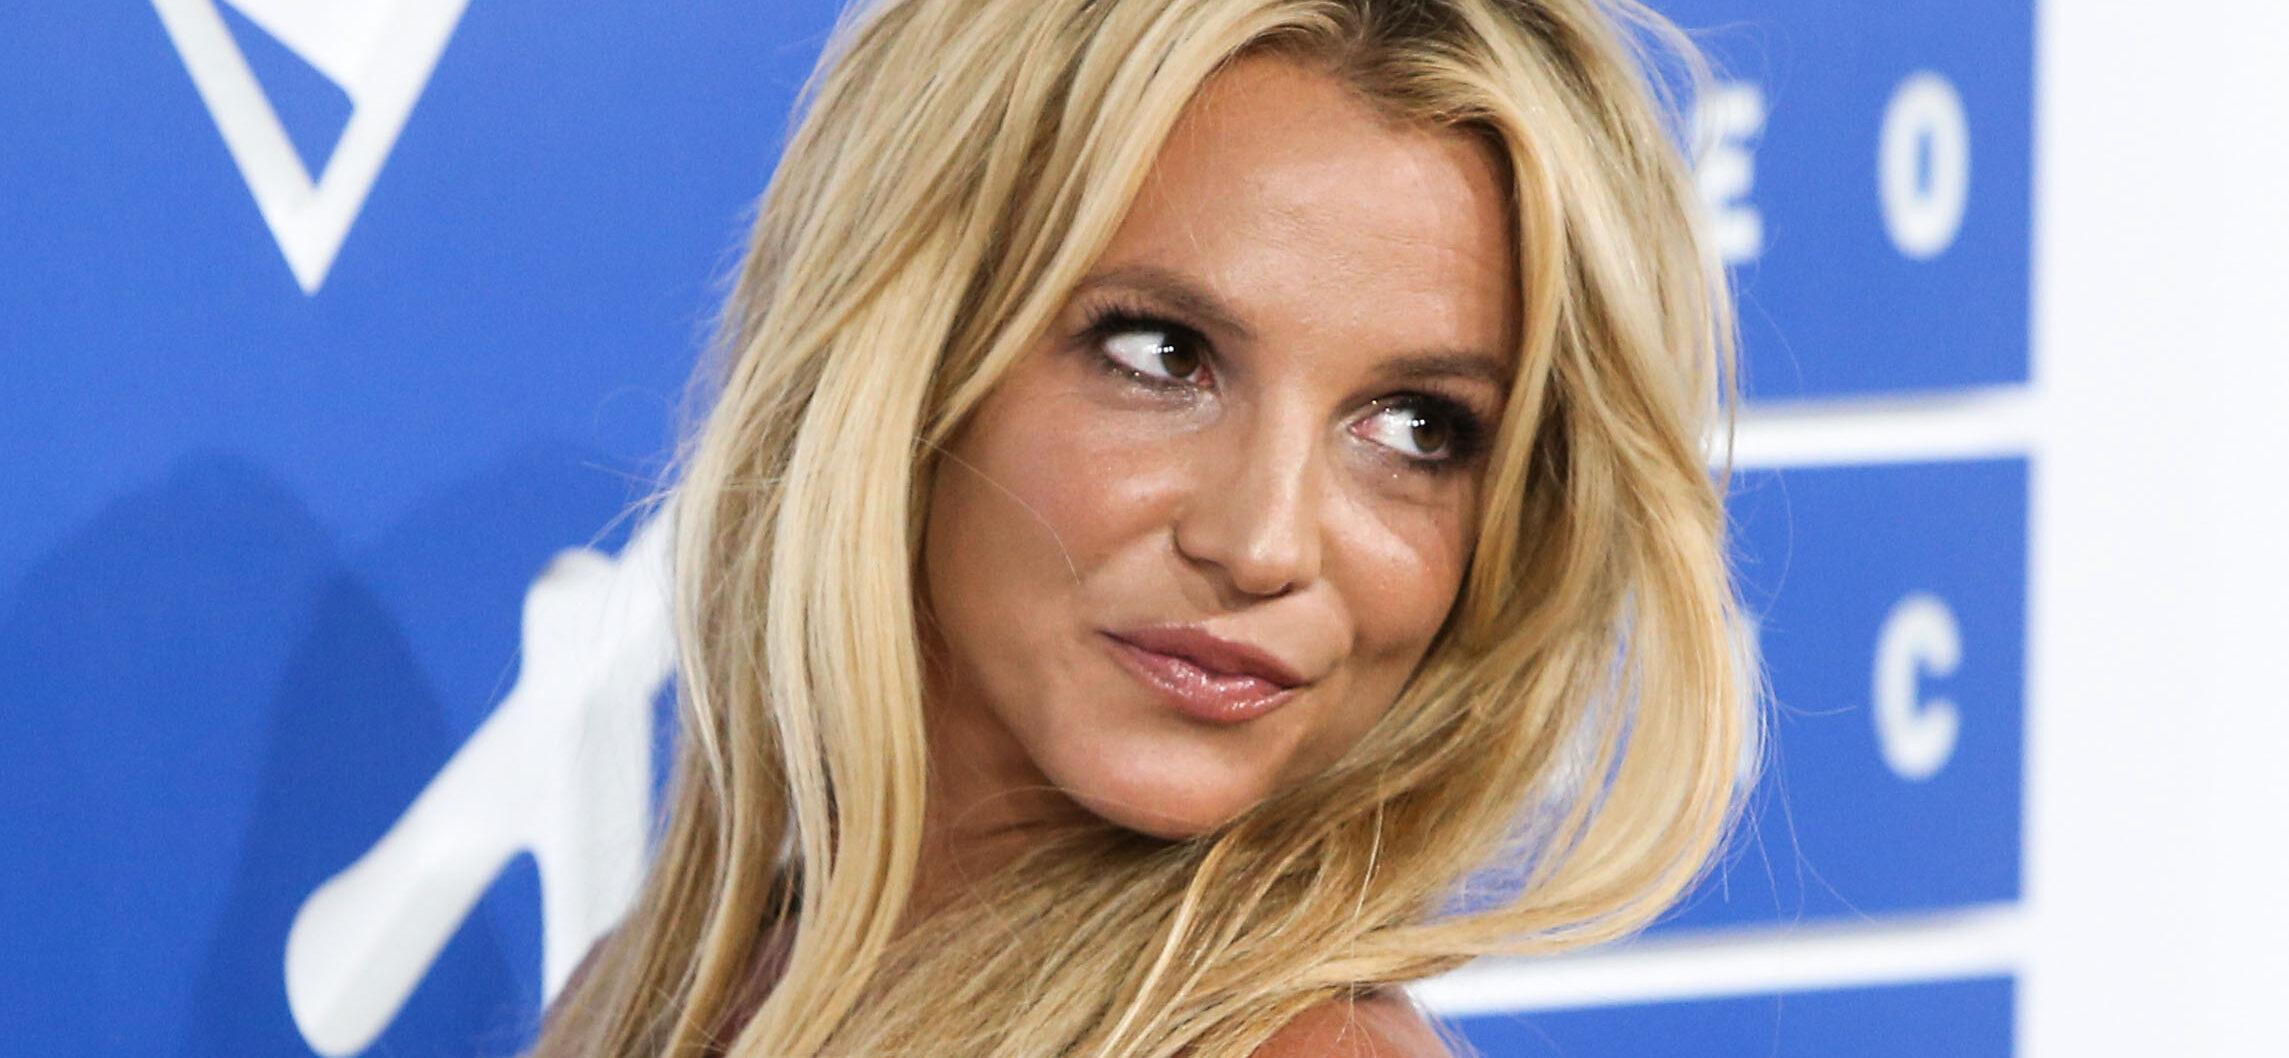 Britney Spears Calls Out Alyssa Milano For ‘Bullying’ Her